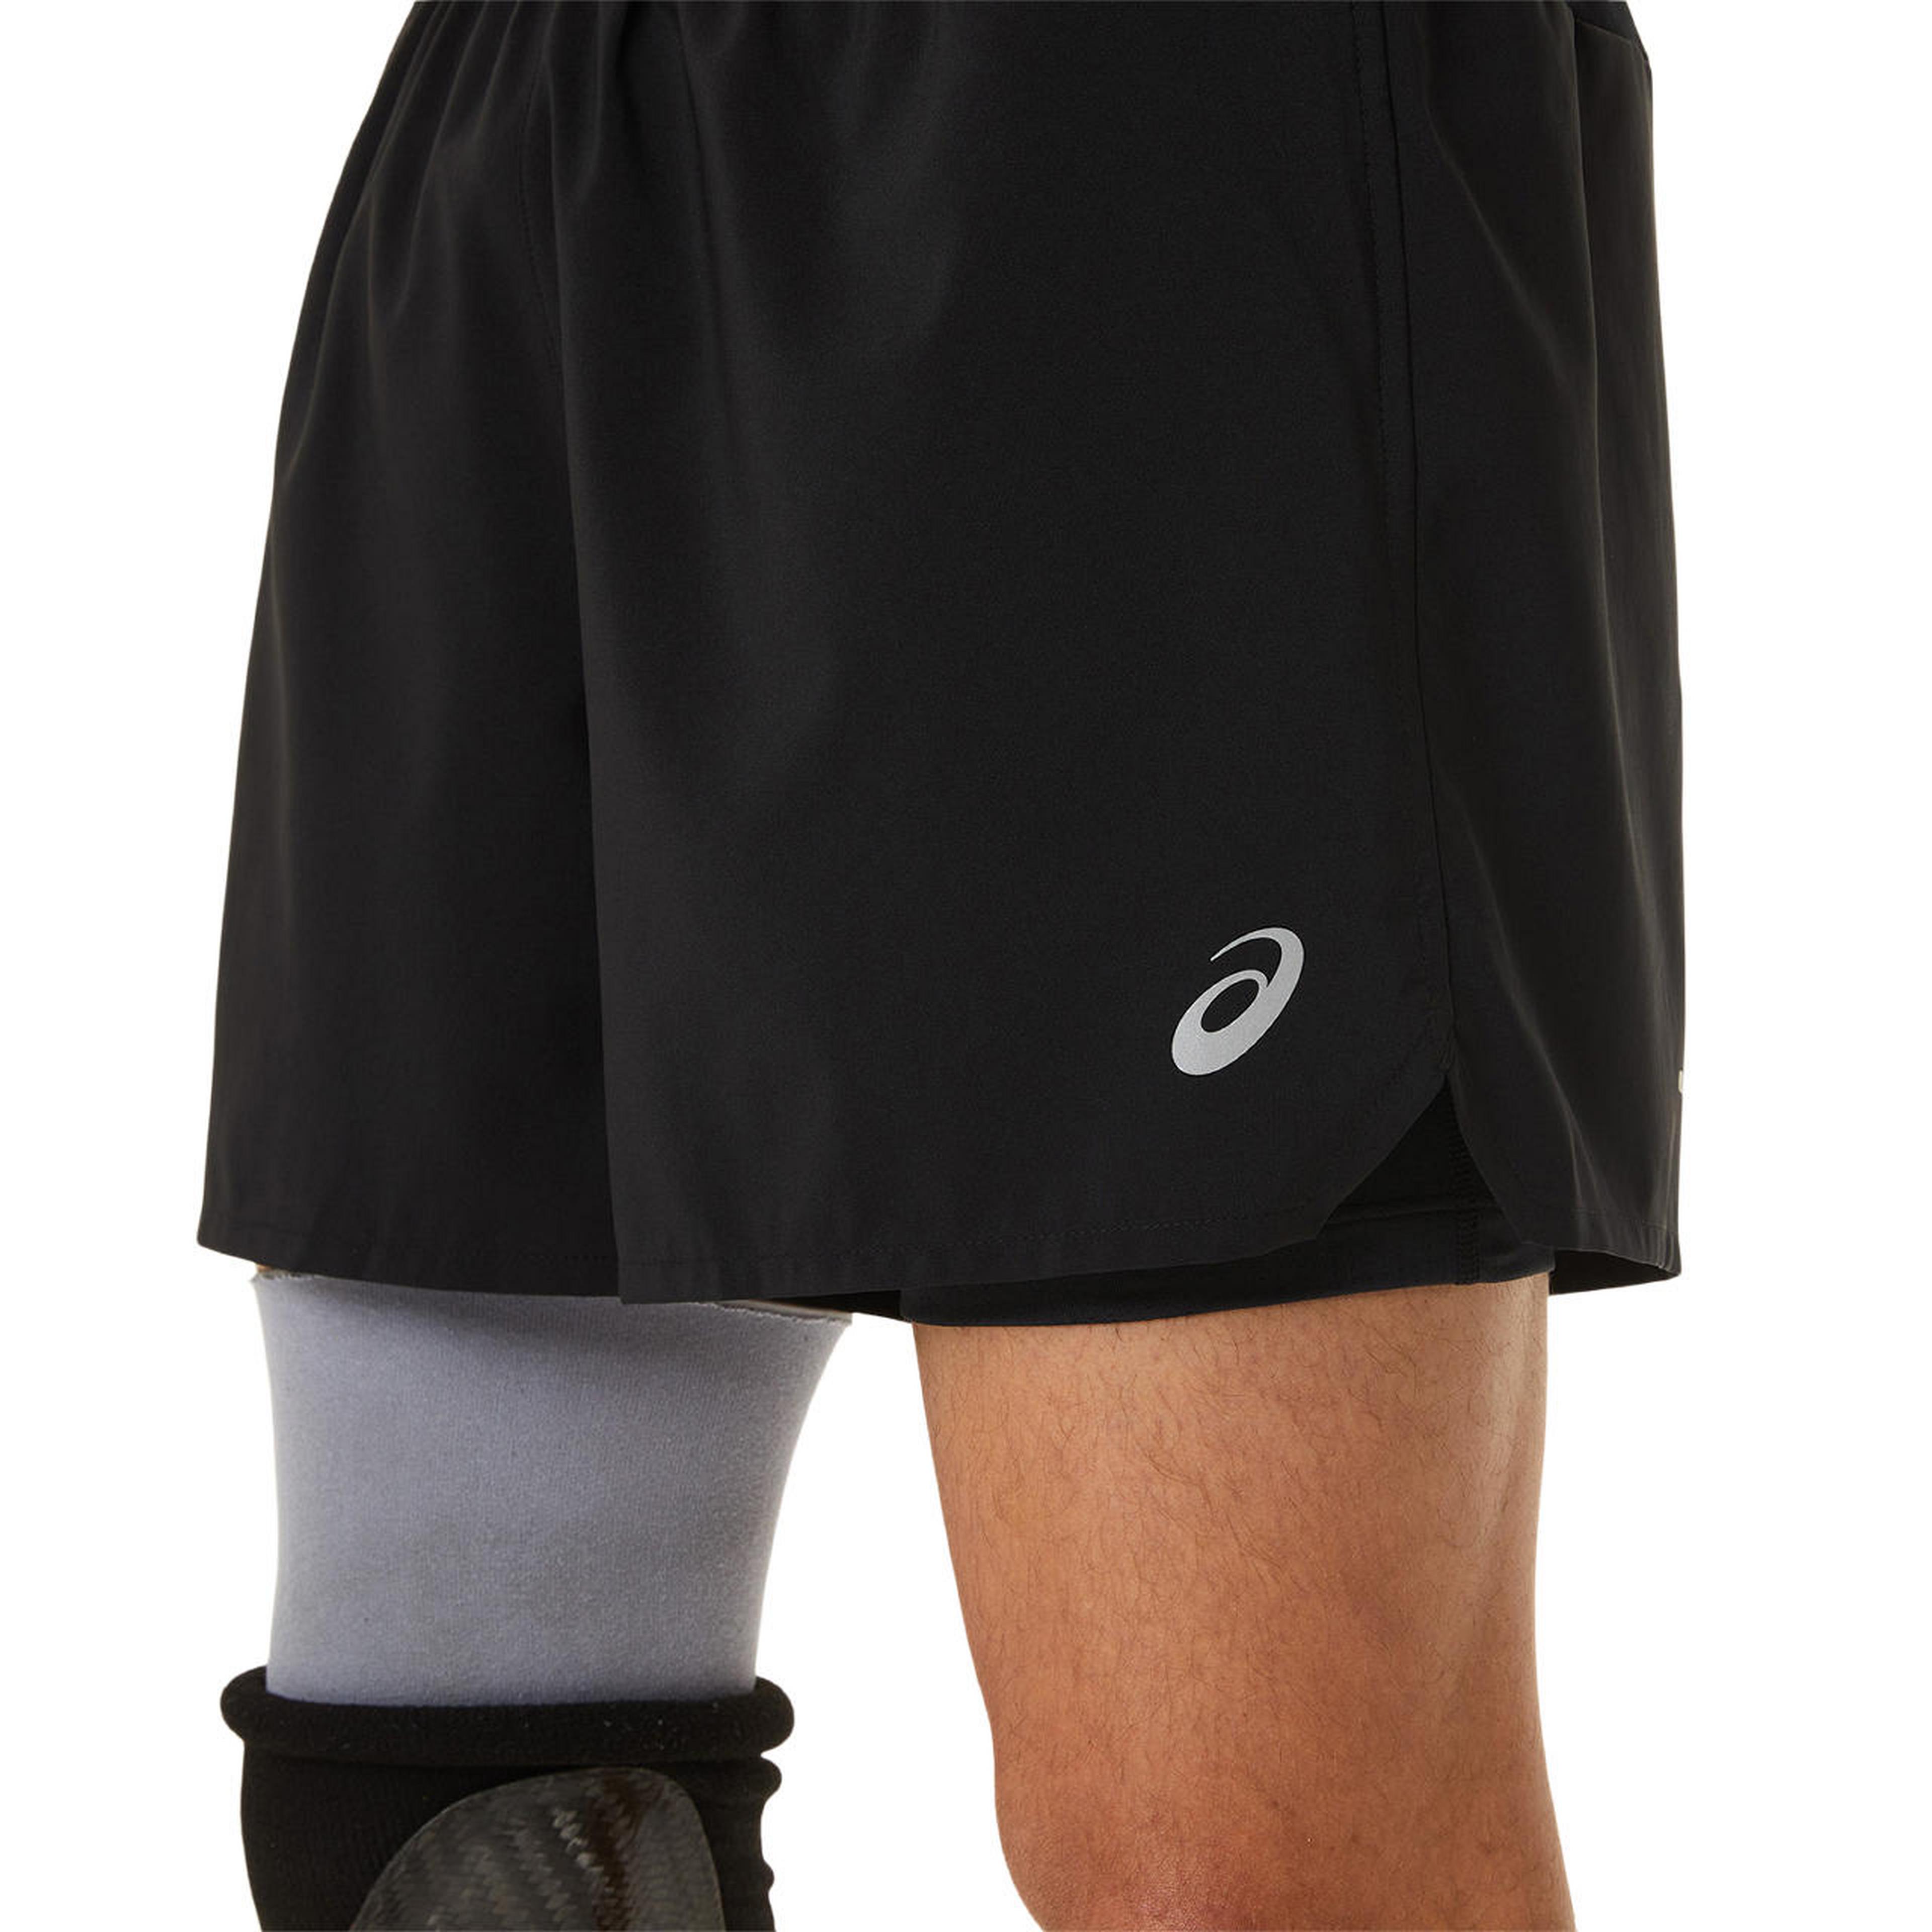 SHORTS | 2-N-1 Asics 5IN ROAD Wiggle